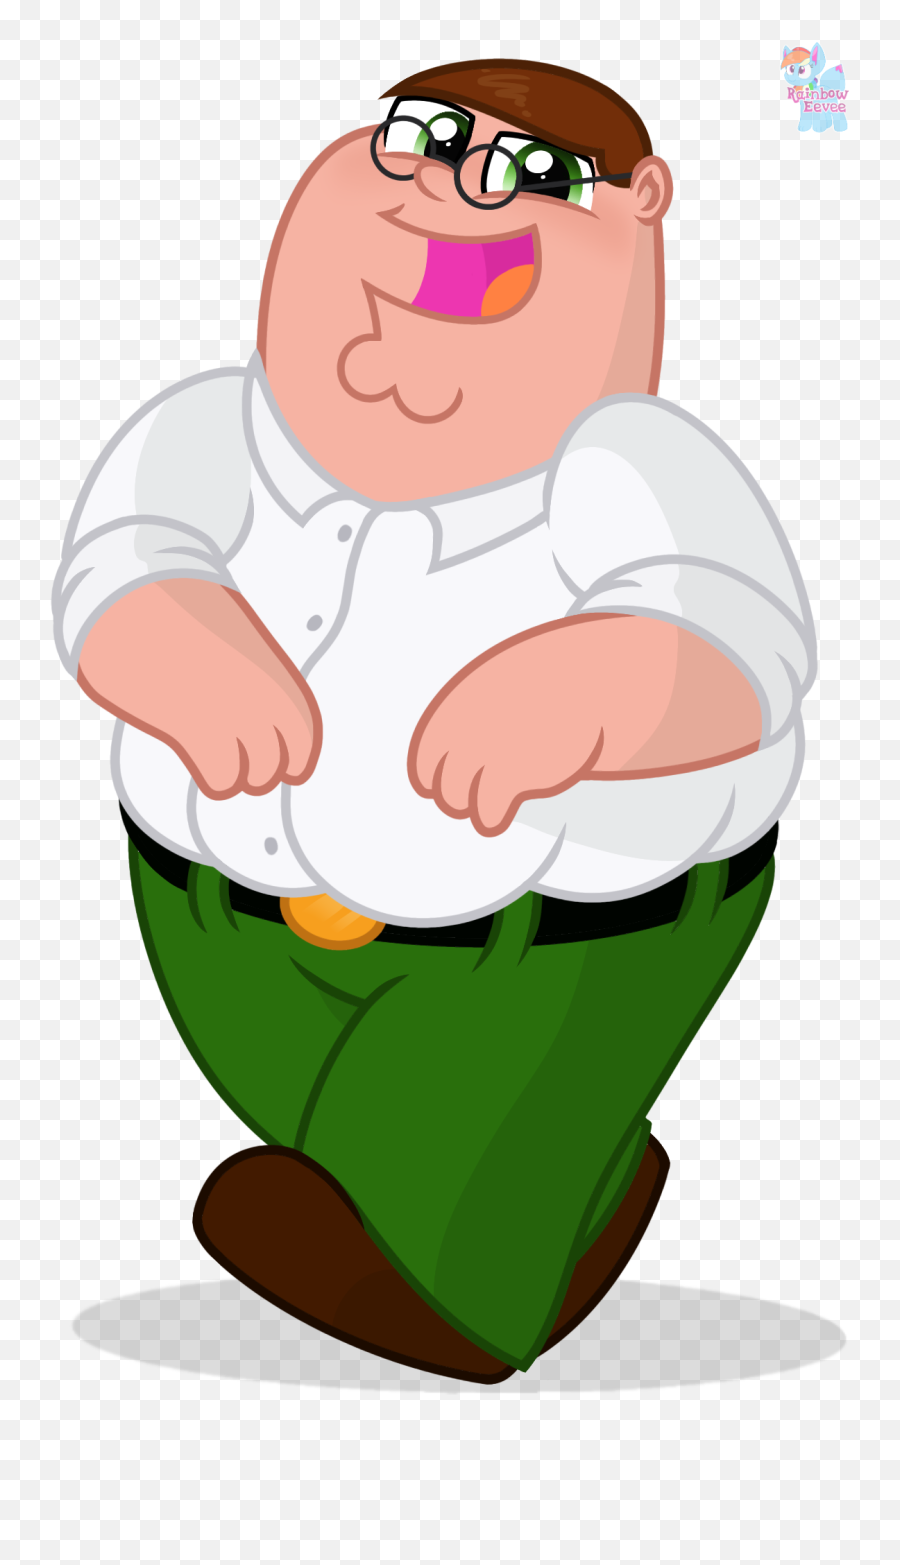 Peter Griffin Laughing - Peter Griffin In Other Cartoons Emoji,Peter Griffin Text Emoticon